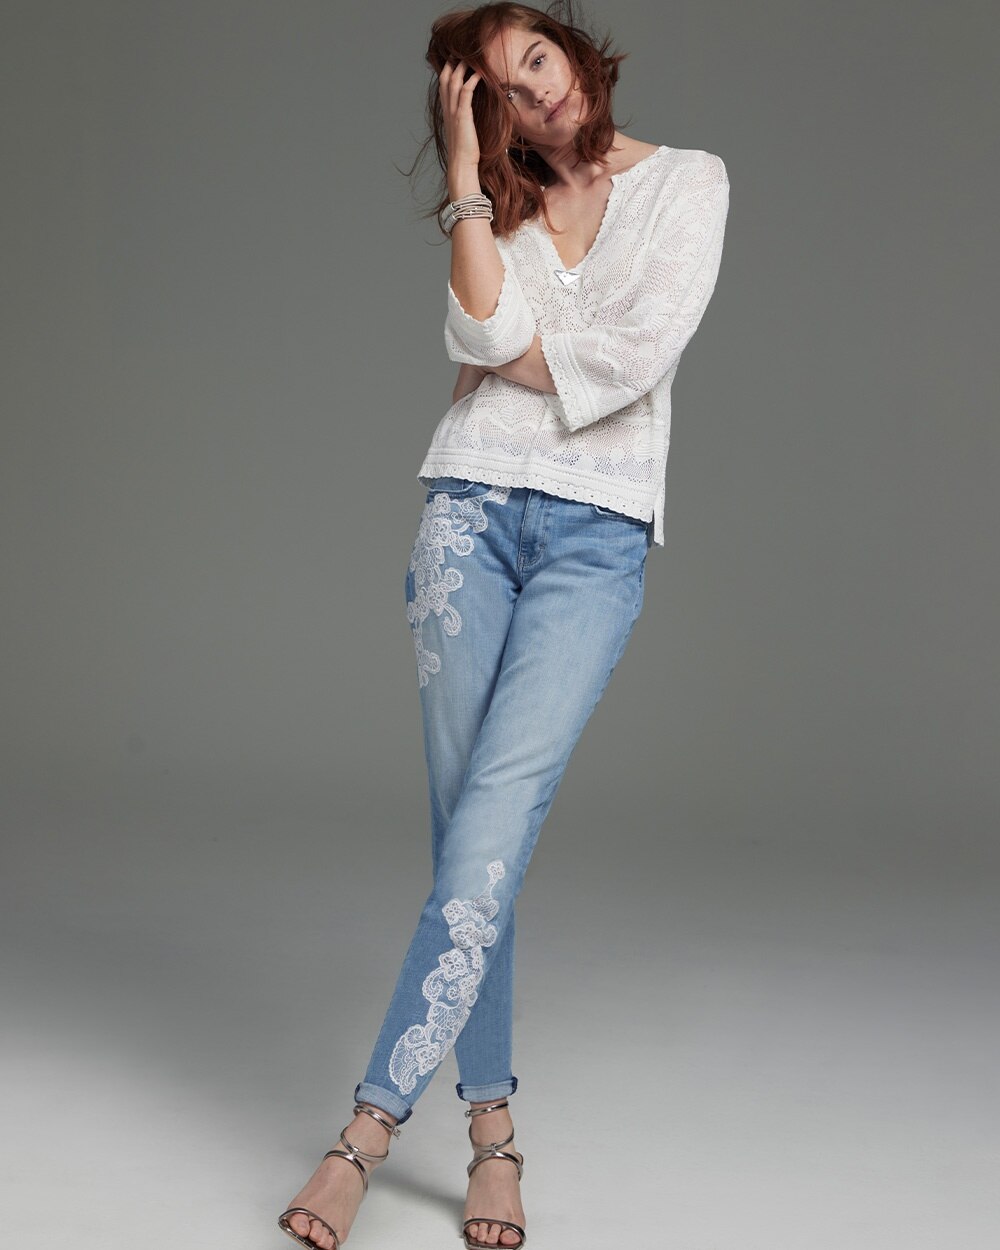 Mid-Rise Everyday Soft Denim\u2122 Lace Girlfriend Jeans video preview image, click to start video